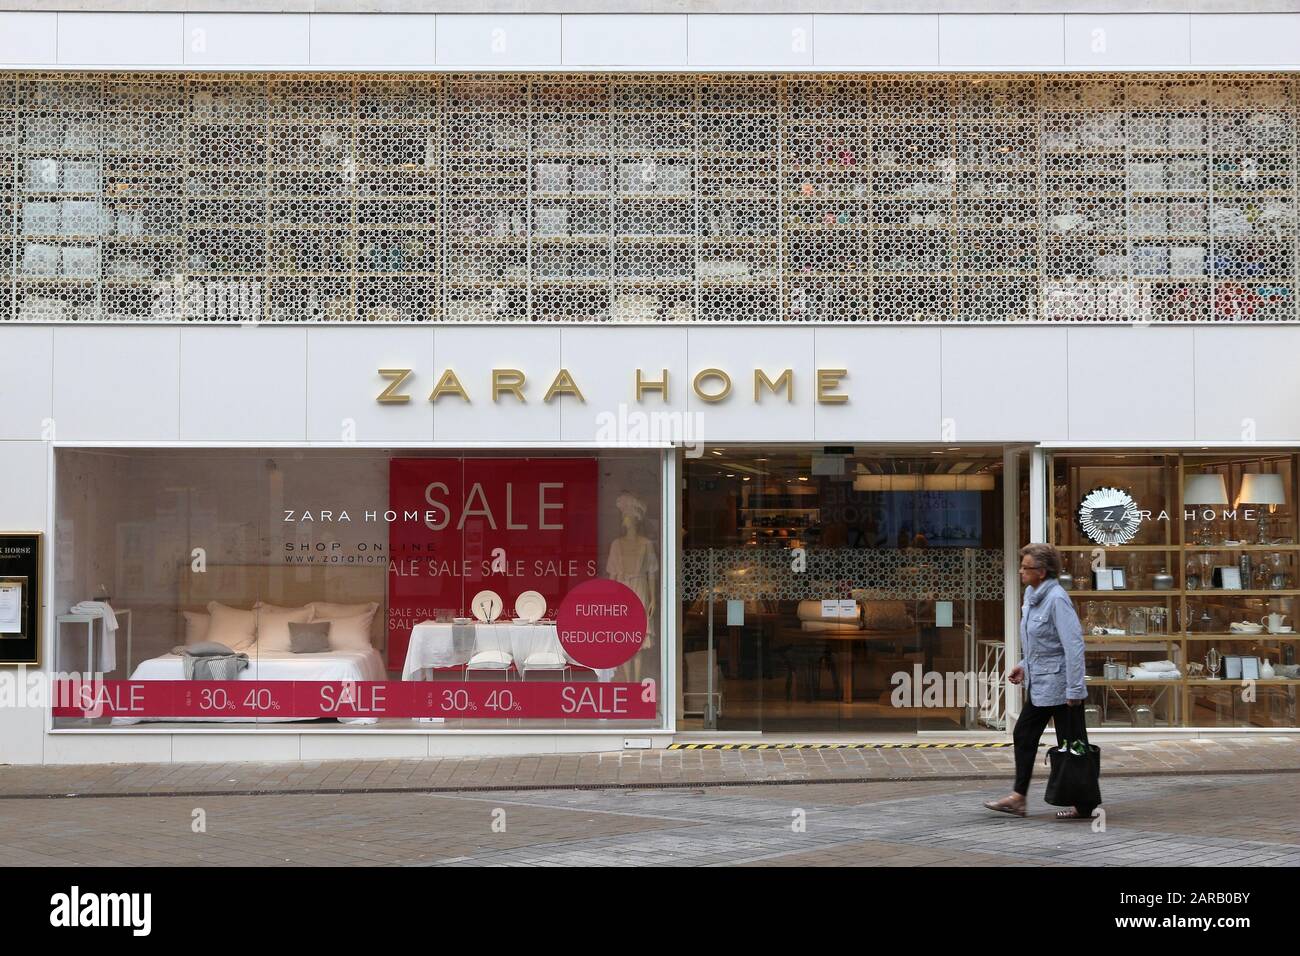 LEEDS, UK - JULY 12, 2016: People enter Zara Home store in Leeds, UK. The  brand known mainly in fashion, also offers home goods products Stock Photo  - Alamy